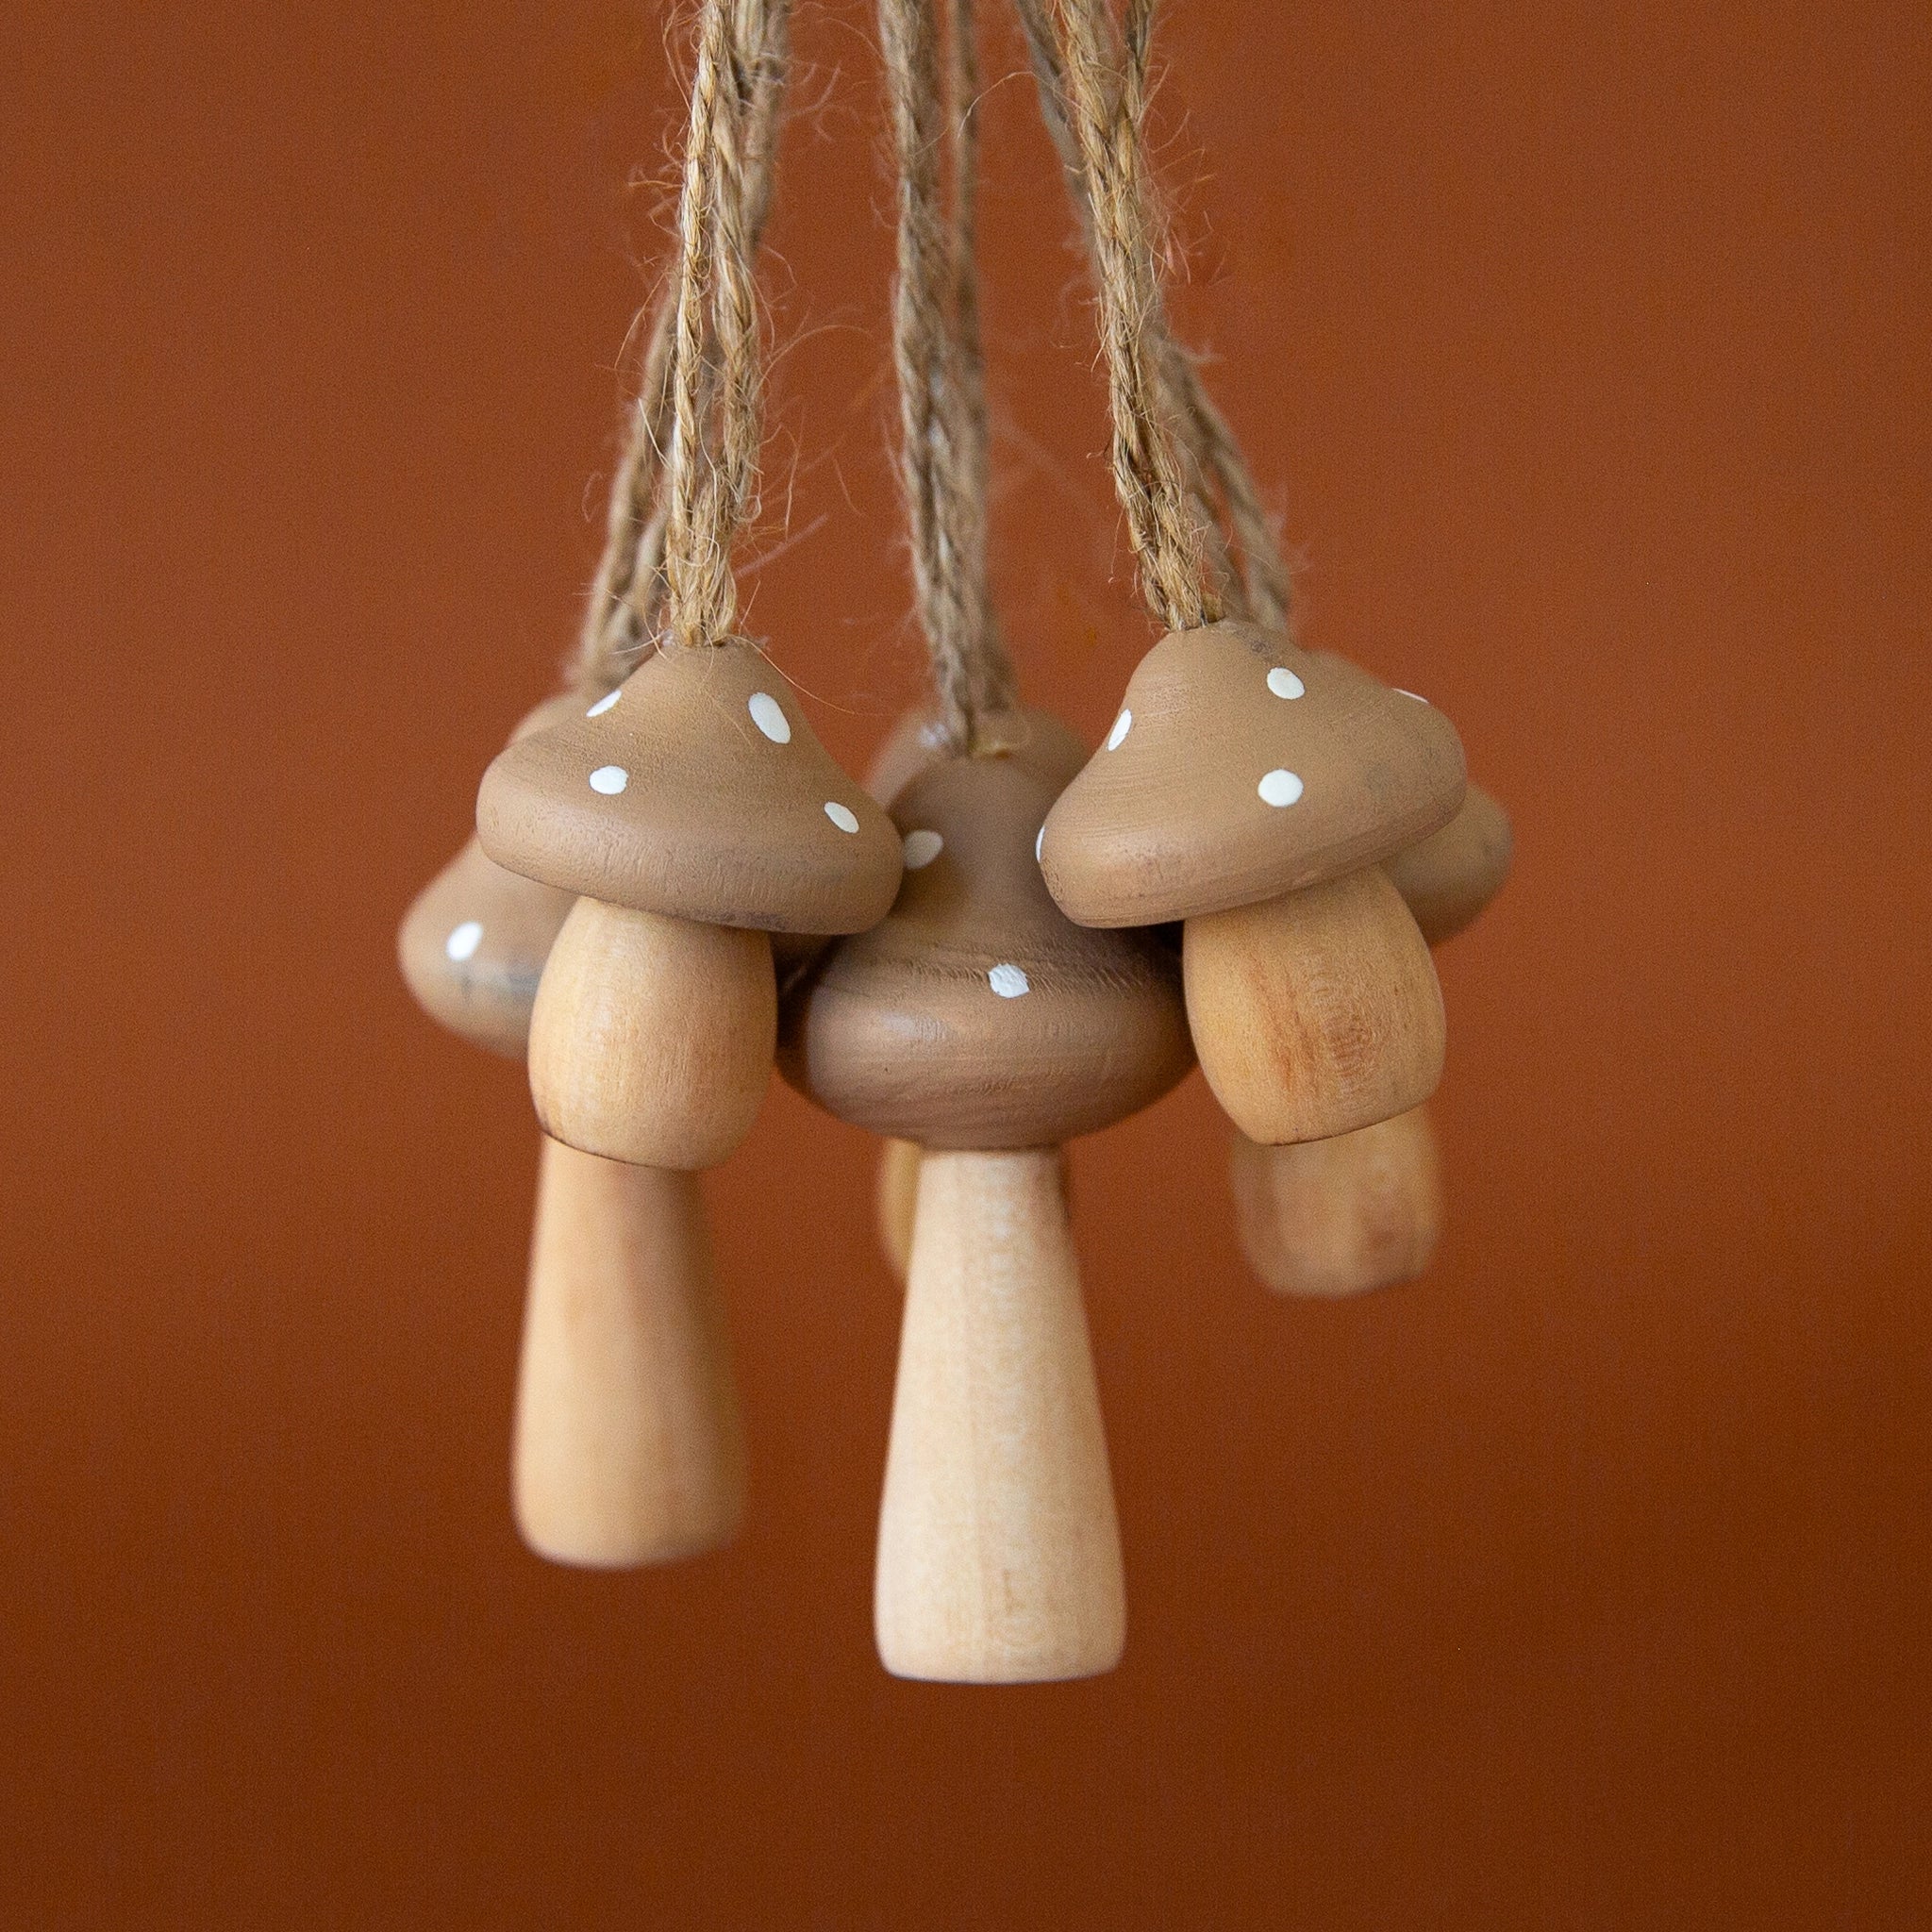 On a burnt orange background is six wooden mushroom shaped ornaments with a twine loop for hanging. 